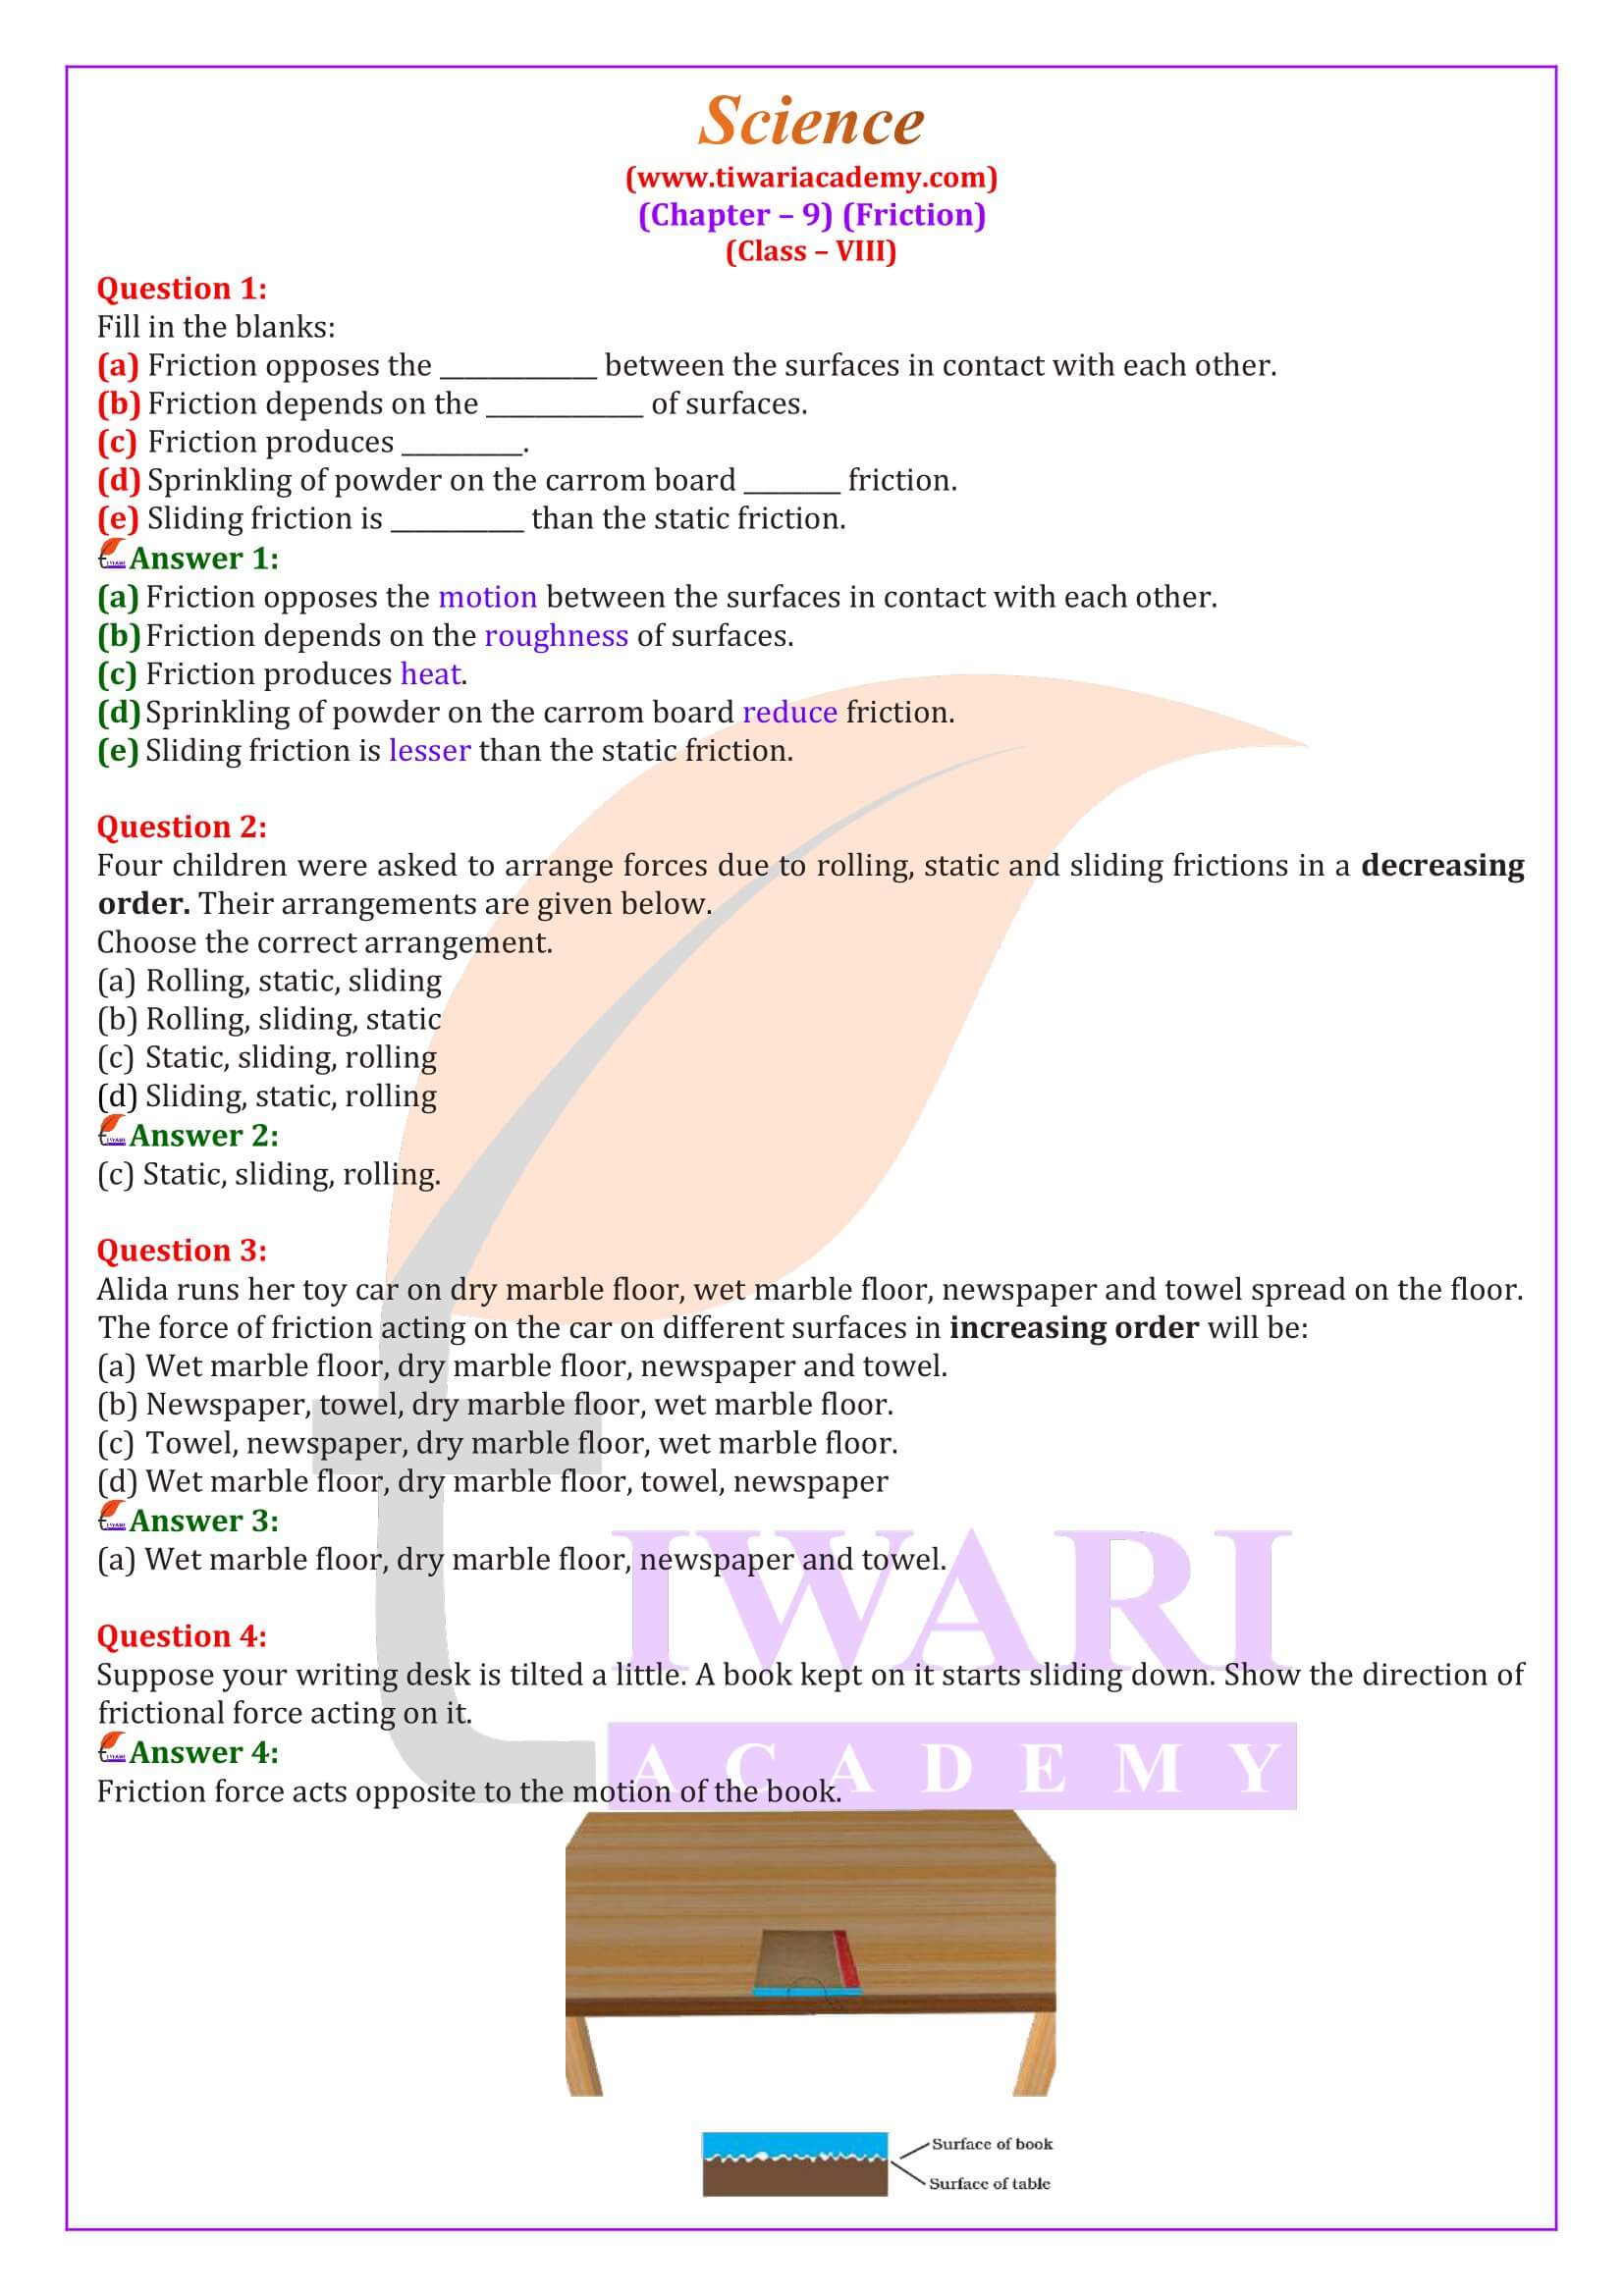 NCERT Solutions for Class 8 Science Chapter 9